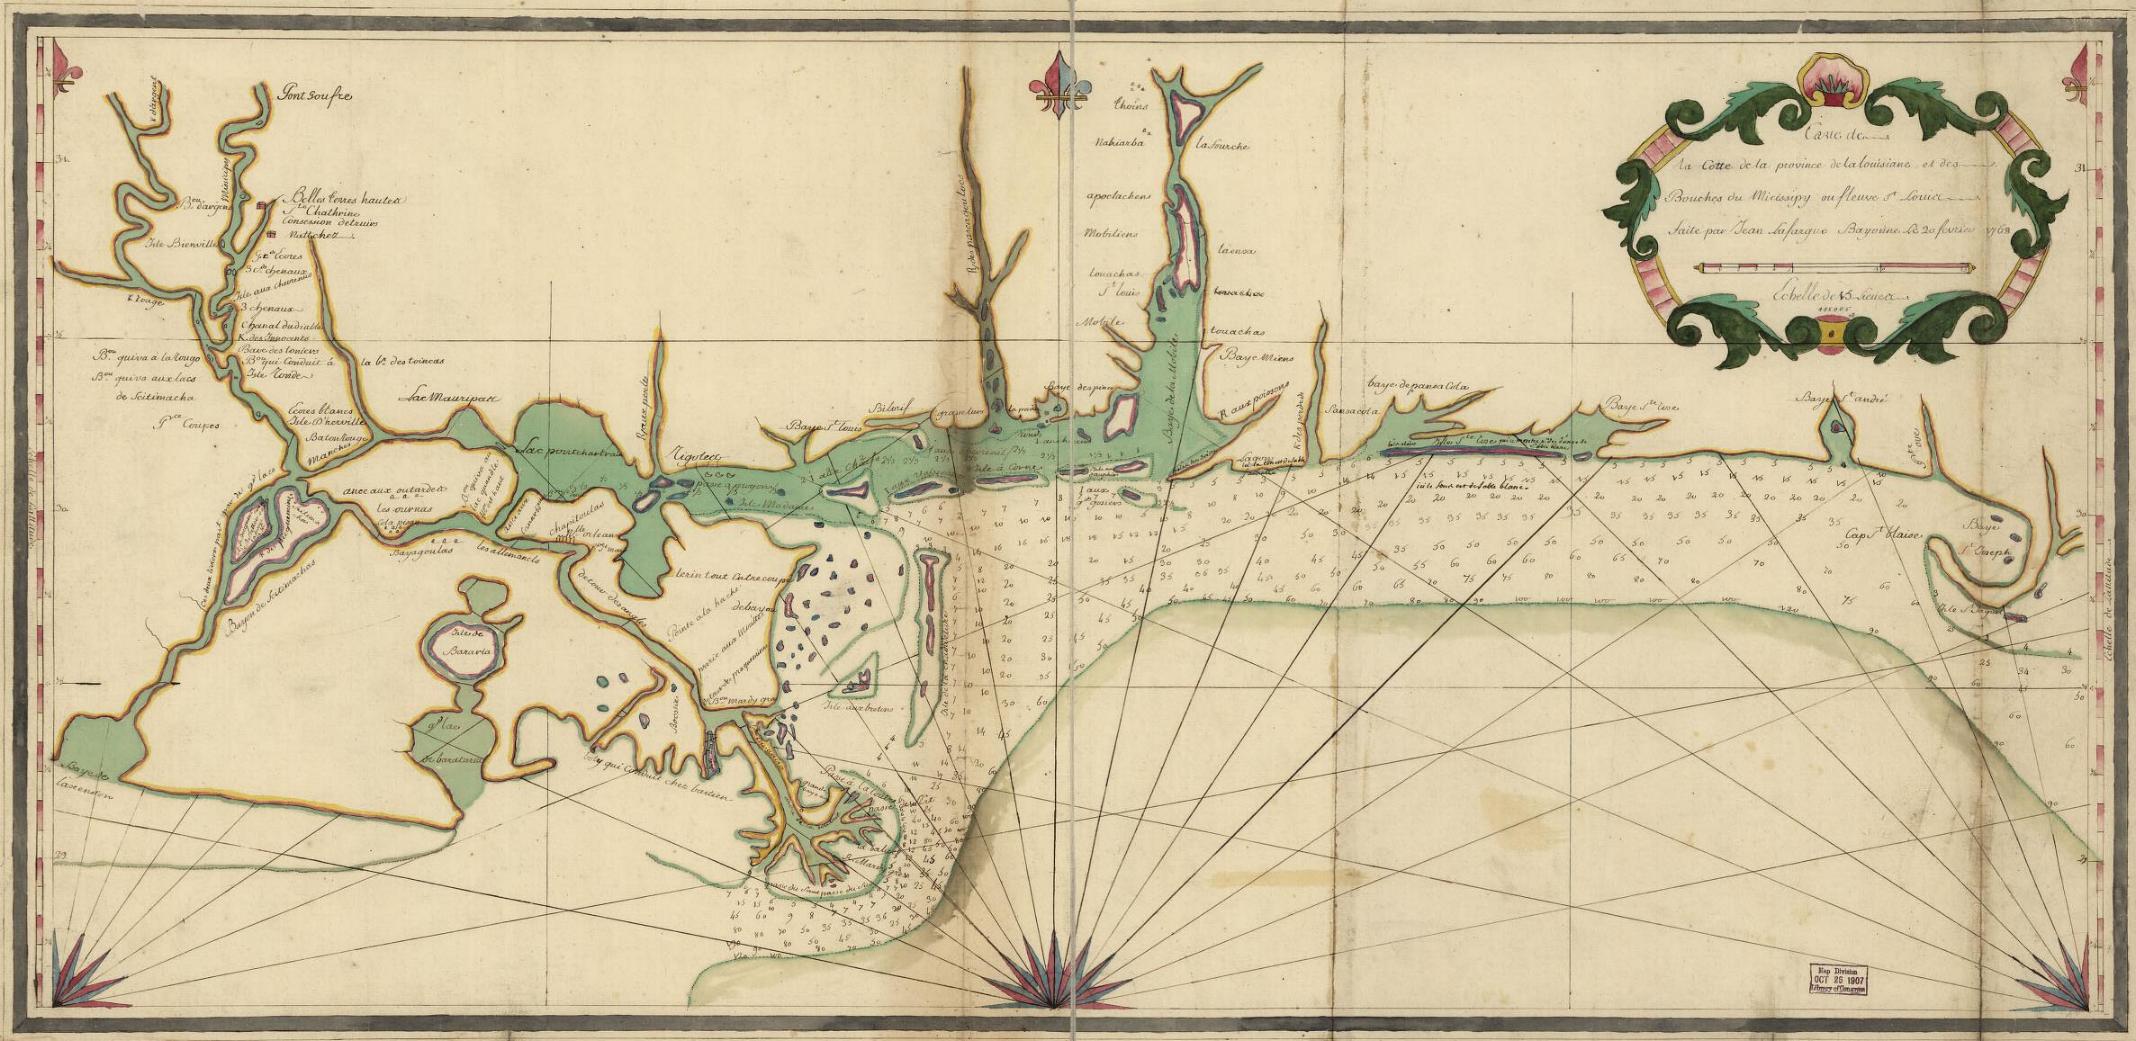 1768 map shows water route from the Lake to the River